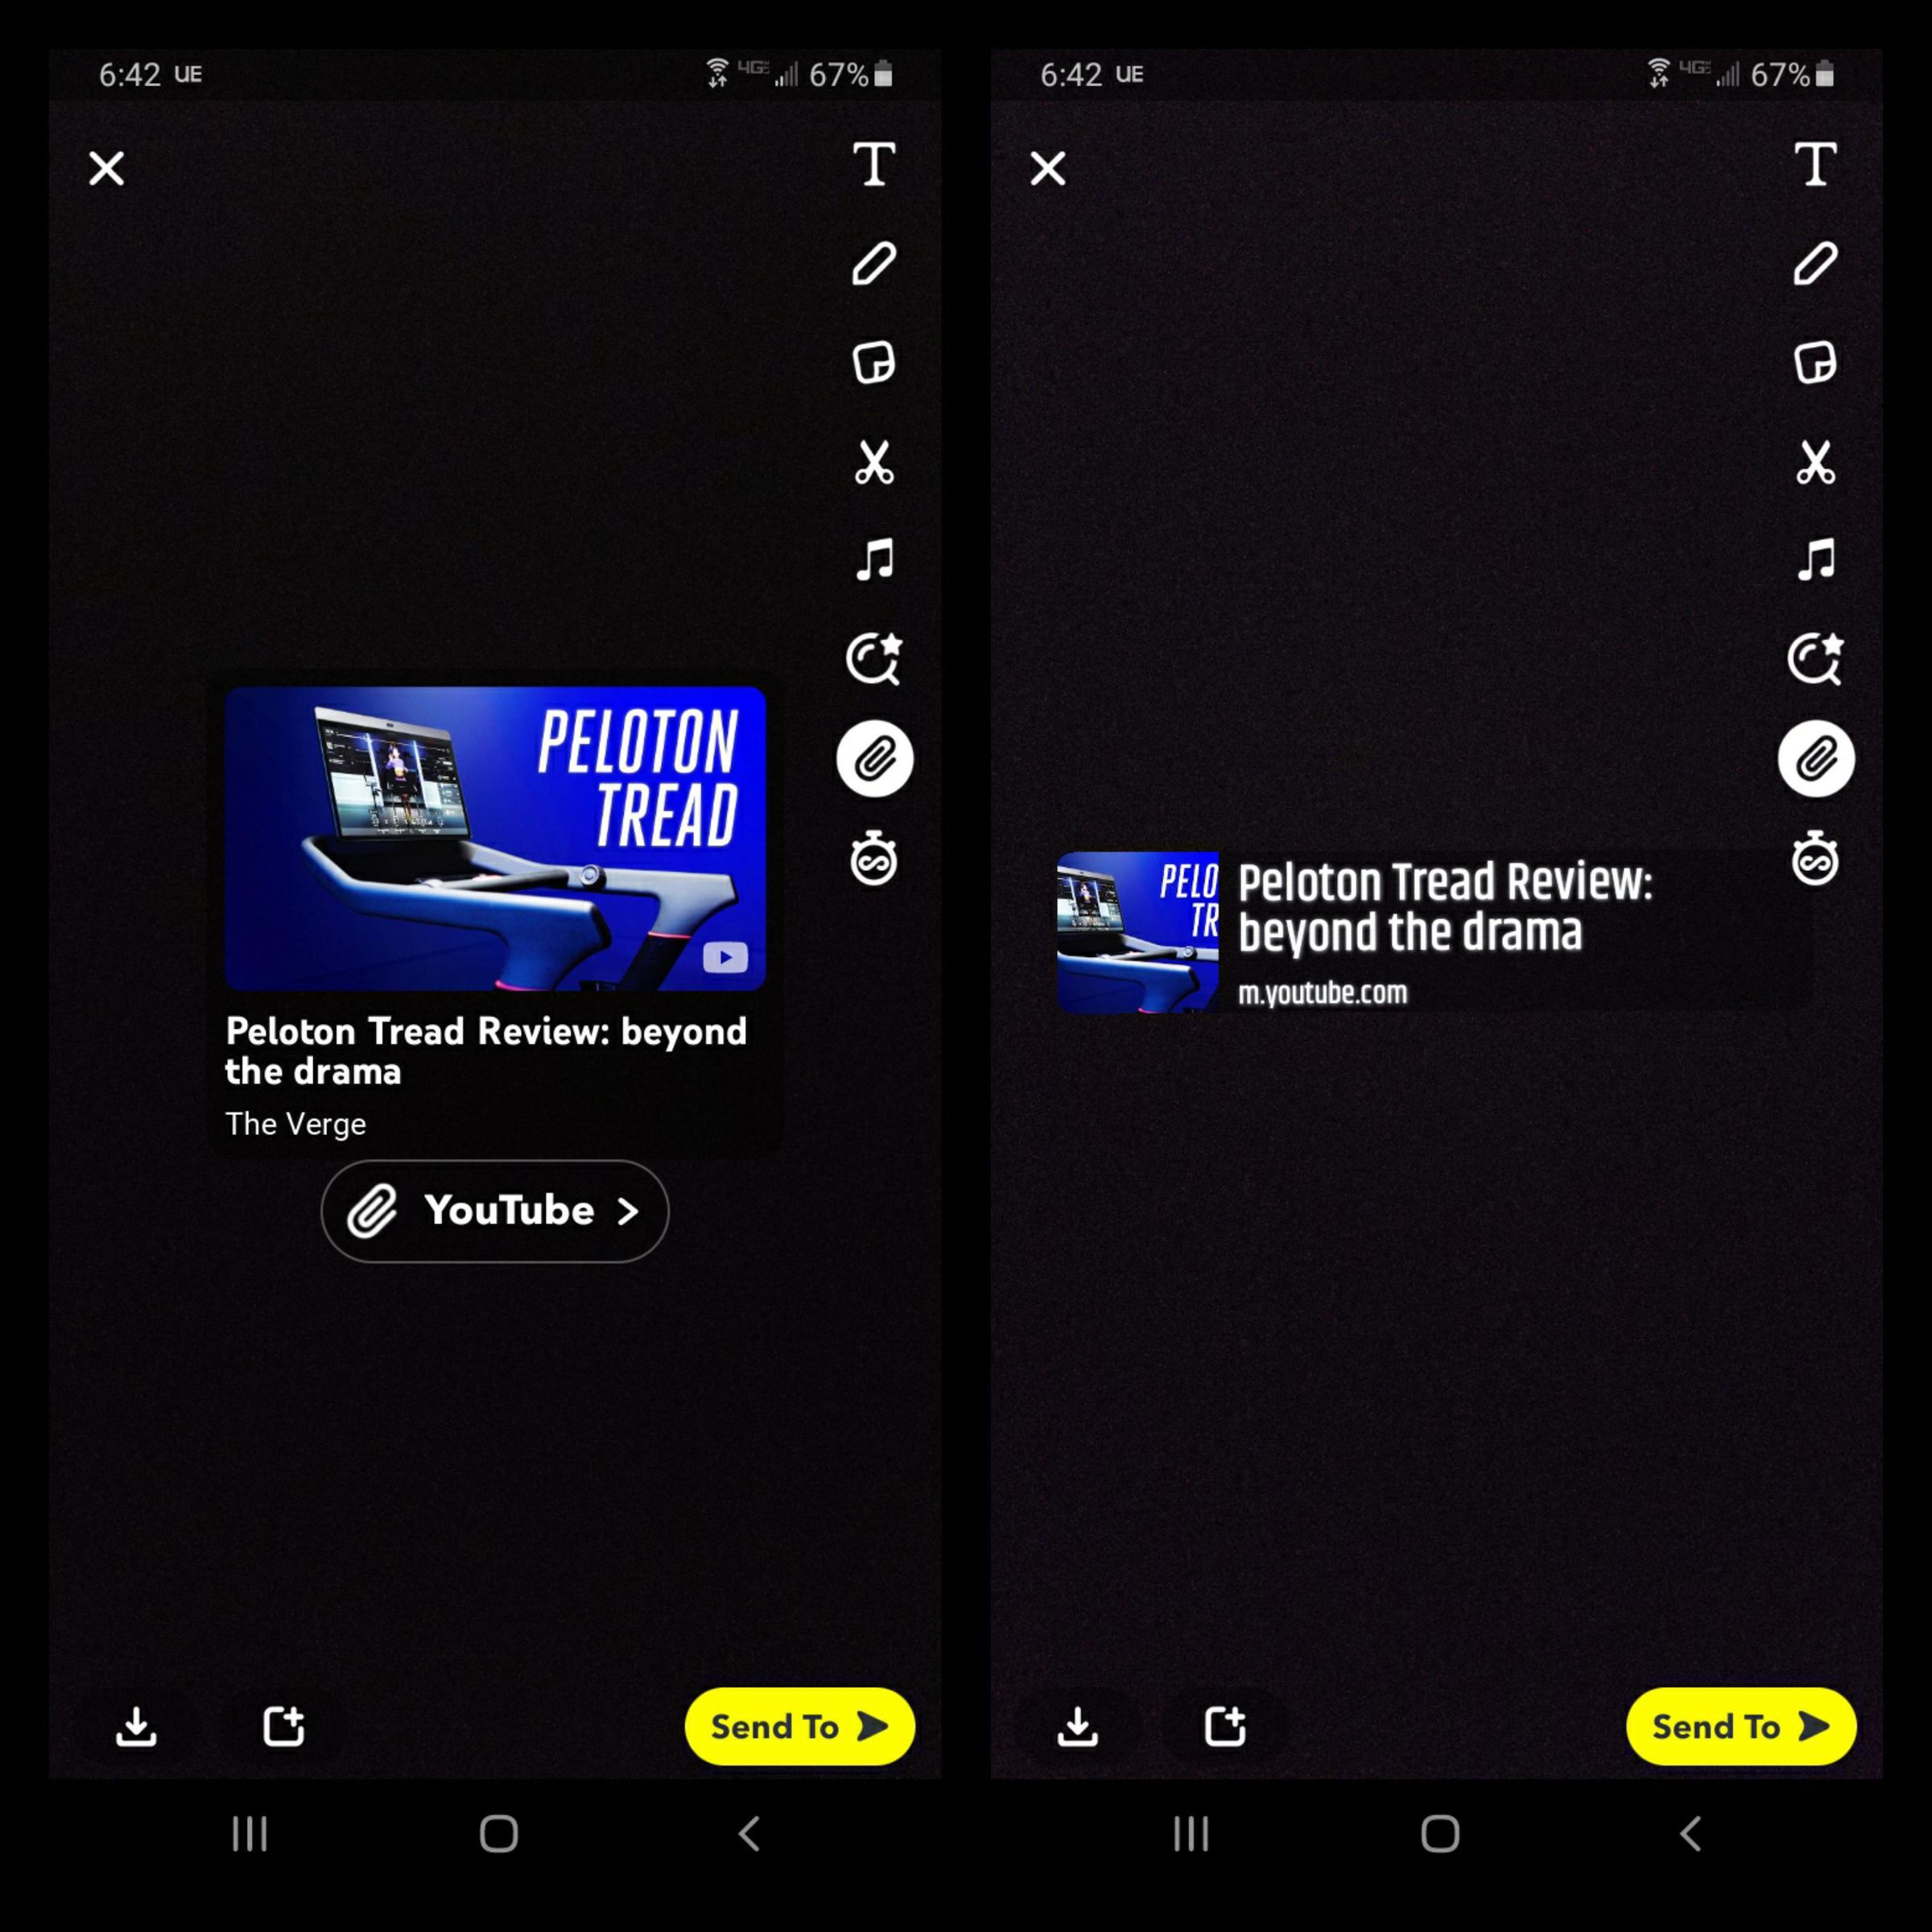 Snapchat’s new YouTube sticker (left) vs. a YouTube video added as a link in Snapchat (right).